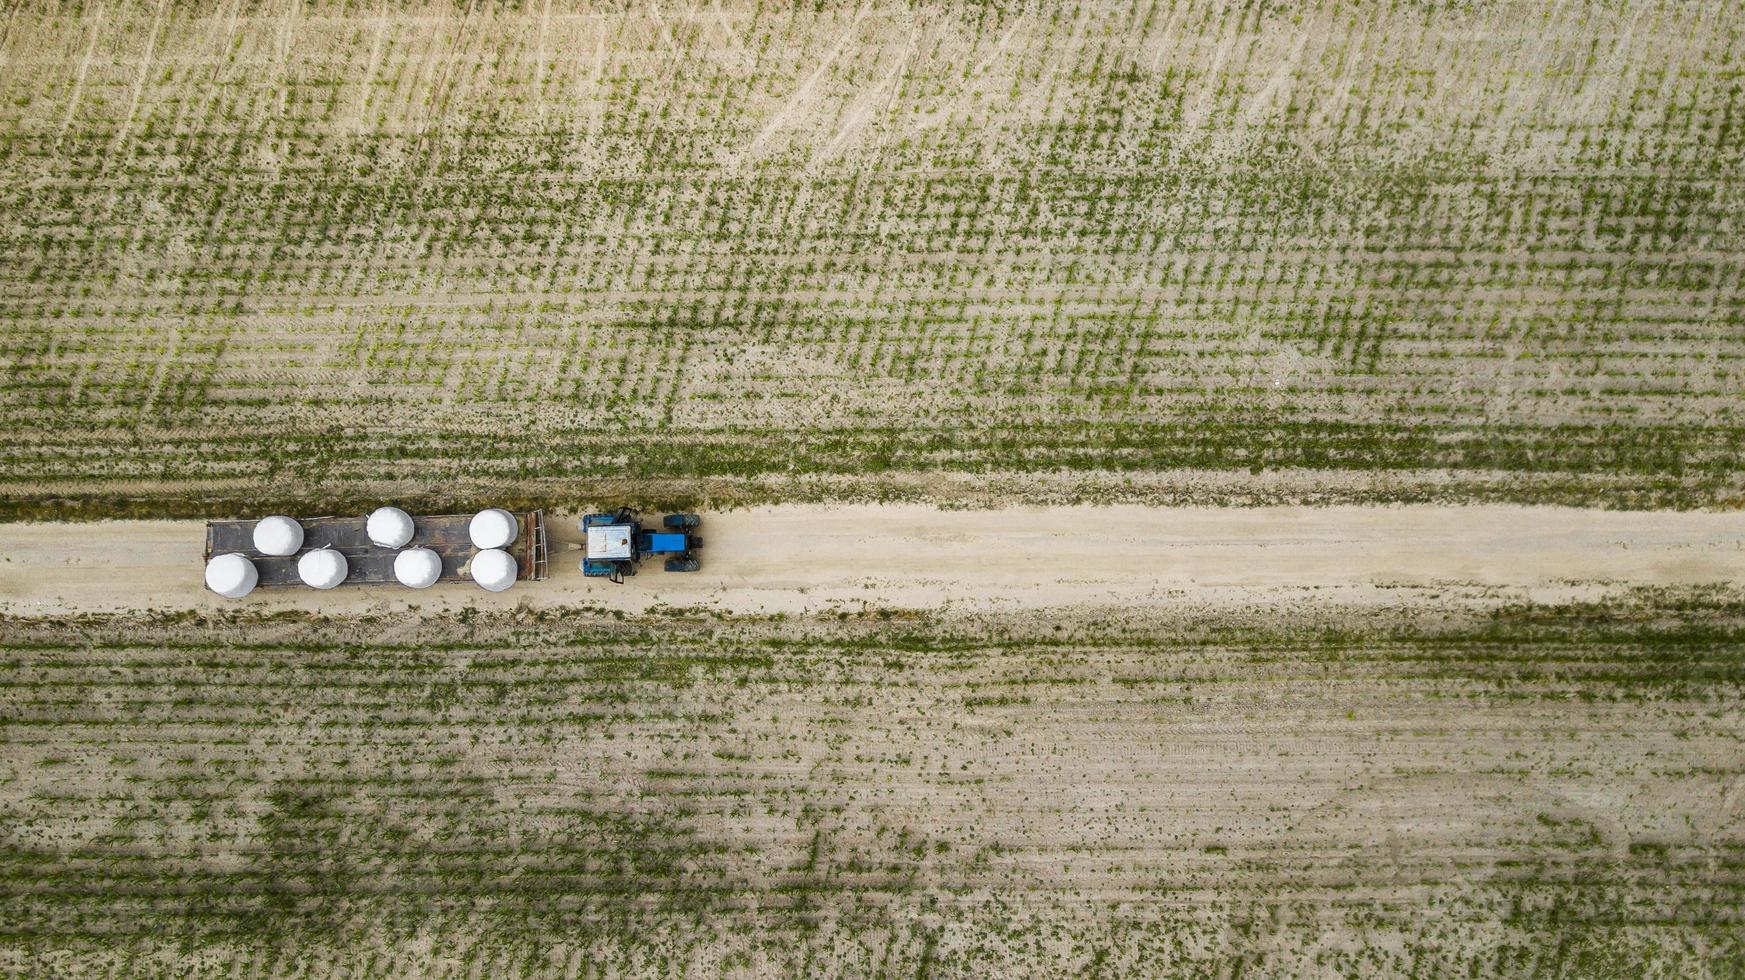 tractor rides on the field and carries bales of hay aerial view photo